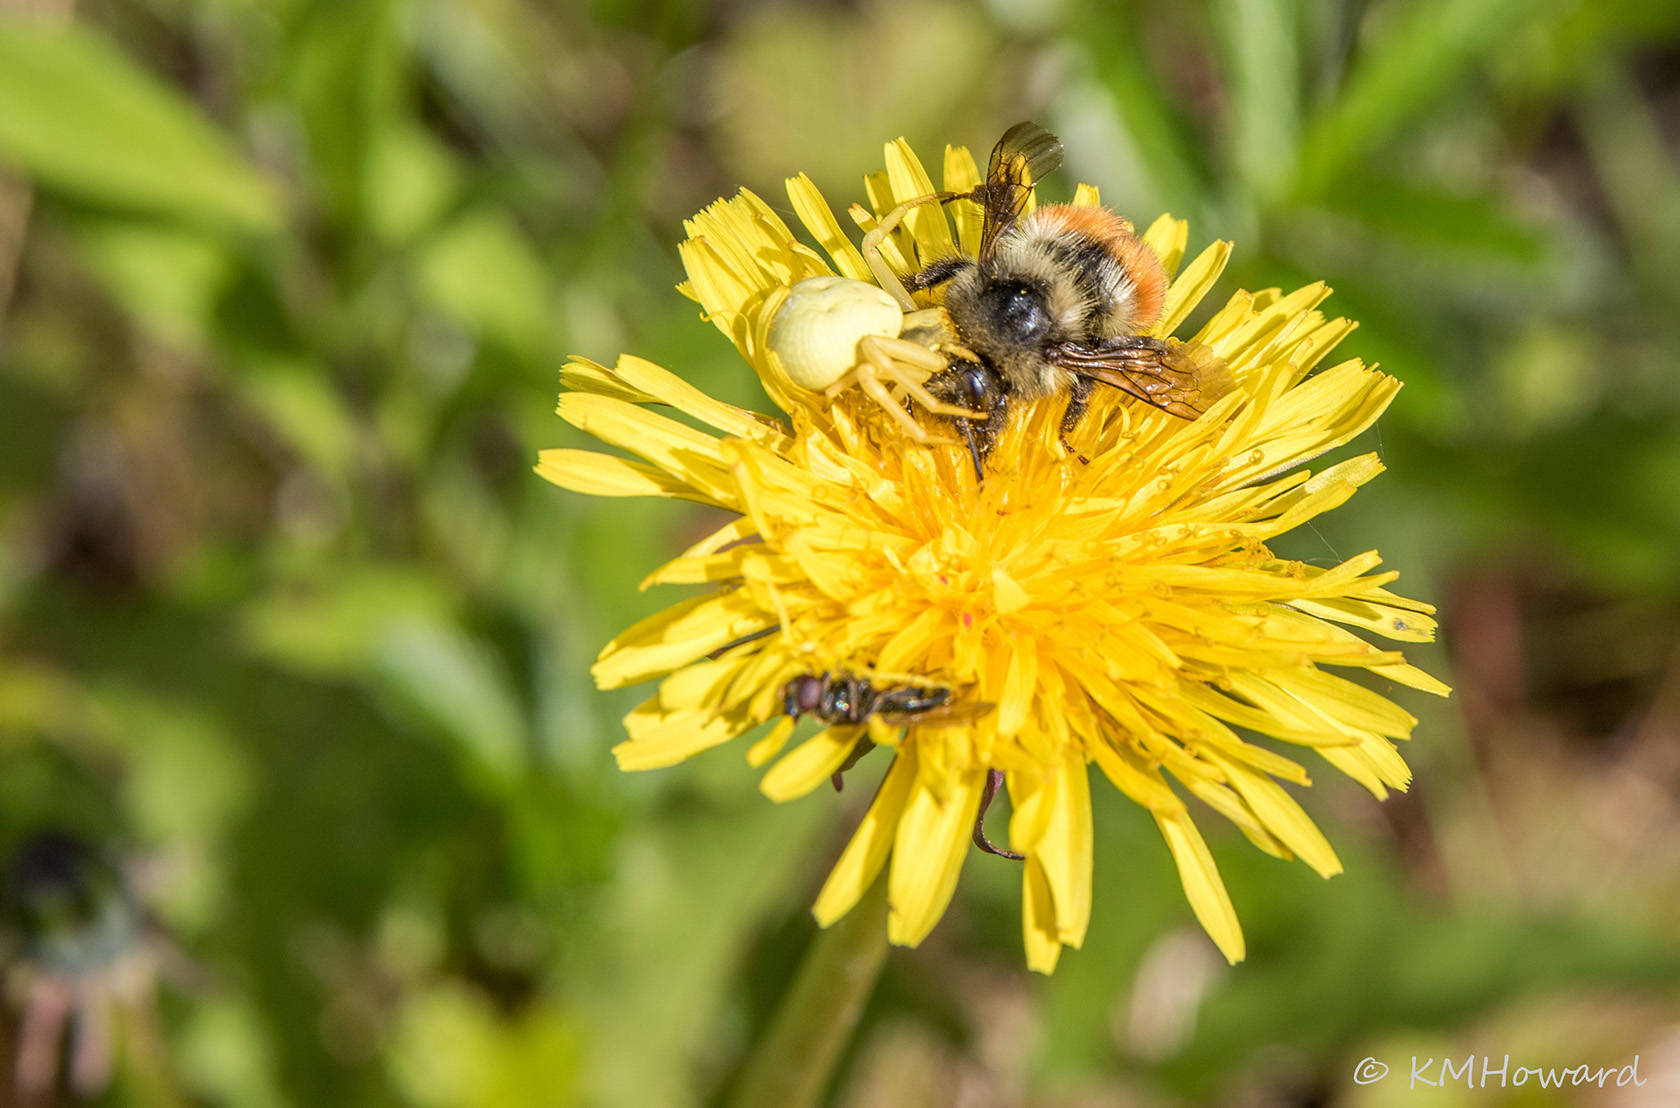 A crab spider has captured a bumble bee on a dandelion flower. (Kerry Howard | For the Juneau Empire)